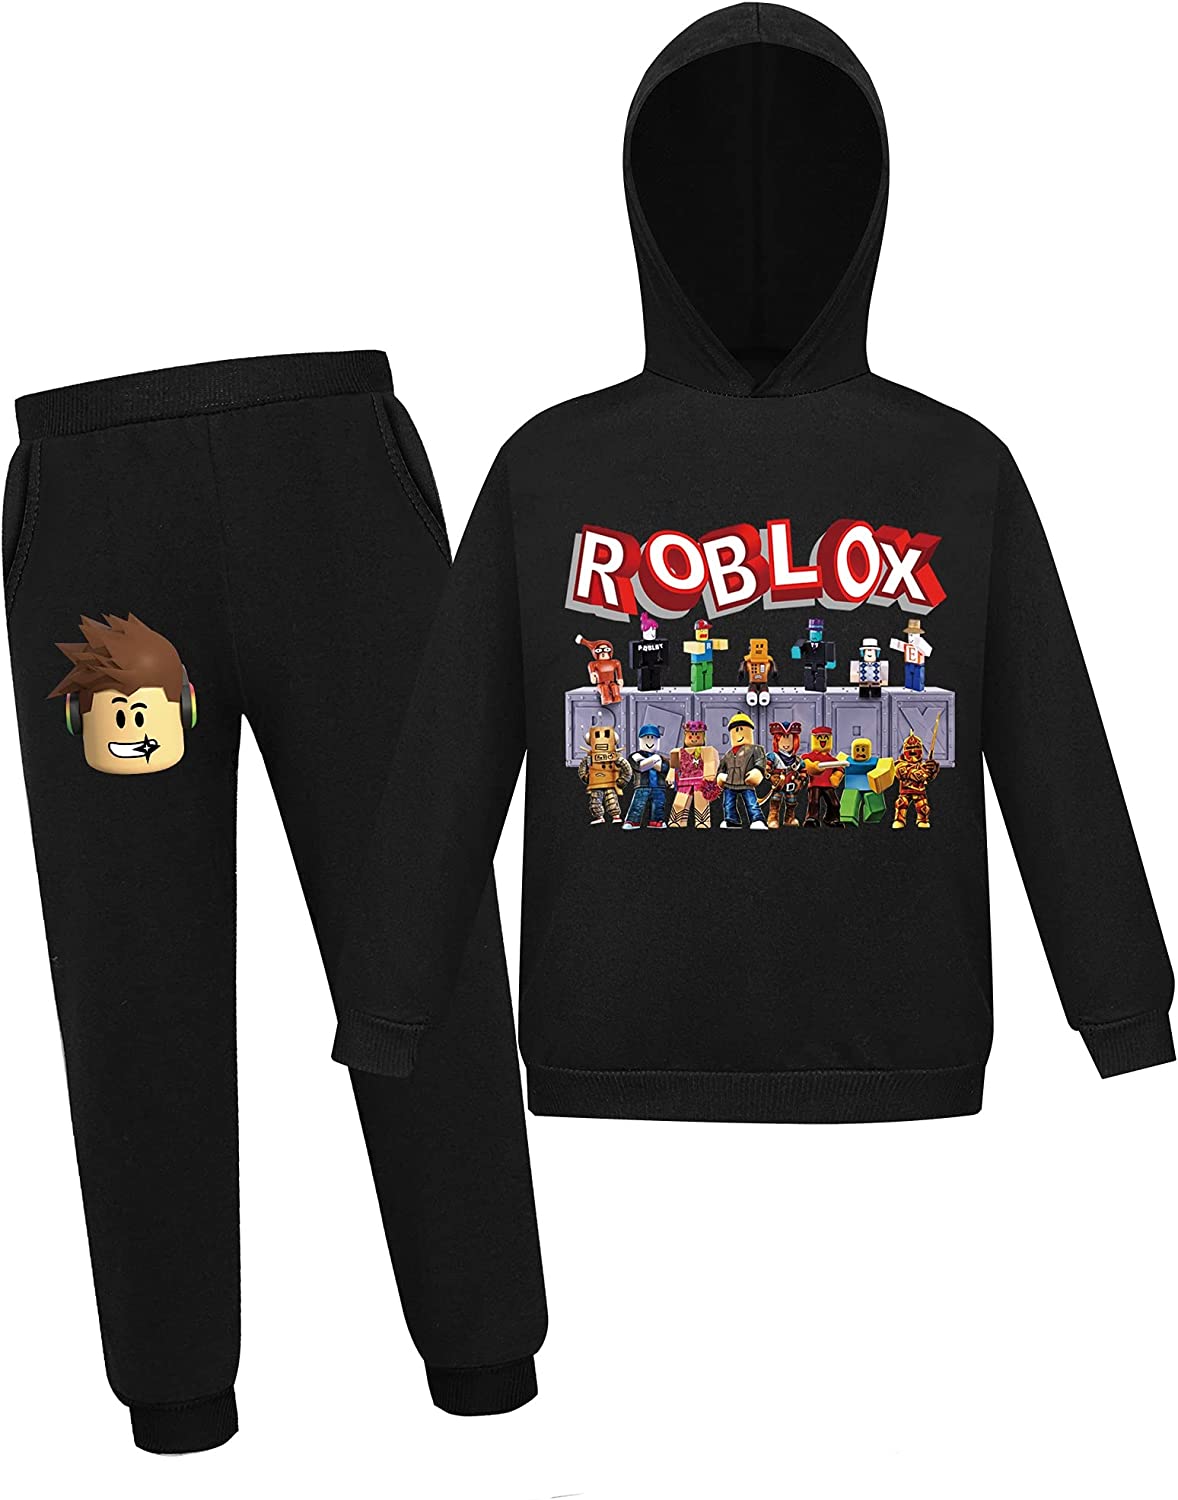 How To Save Heaps Of Money With Roblox Official Shop?